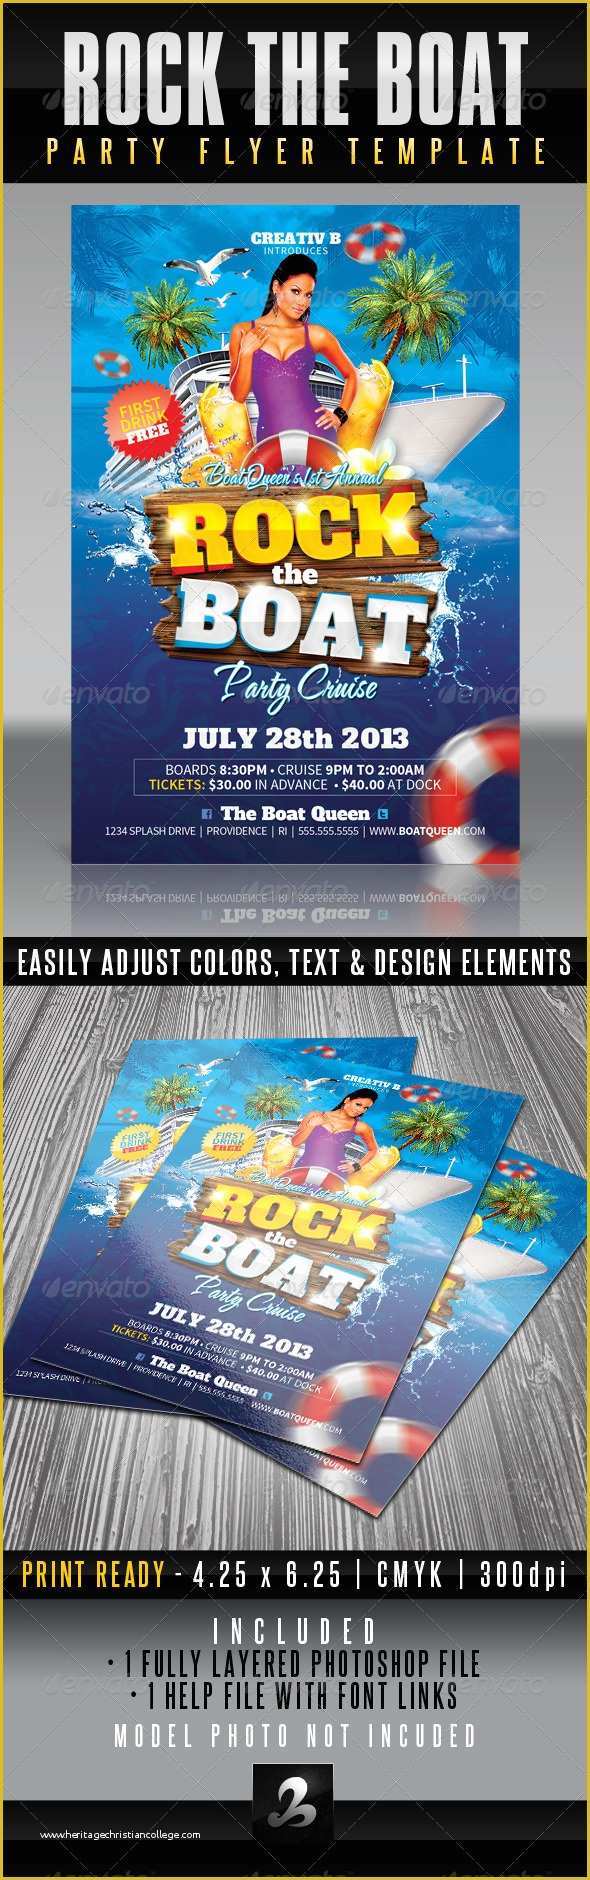 Free Boat Party Flyer Template Of Boat Party Invitations